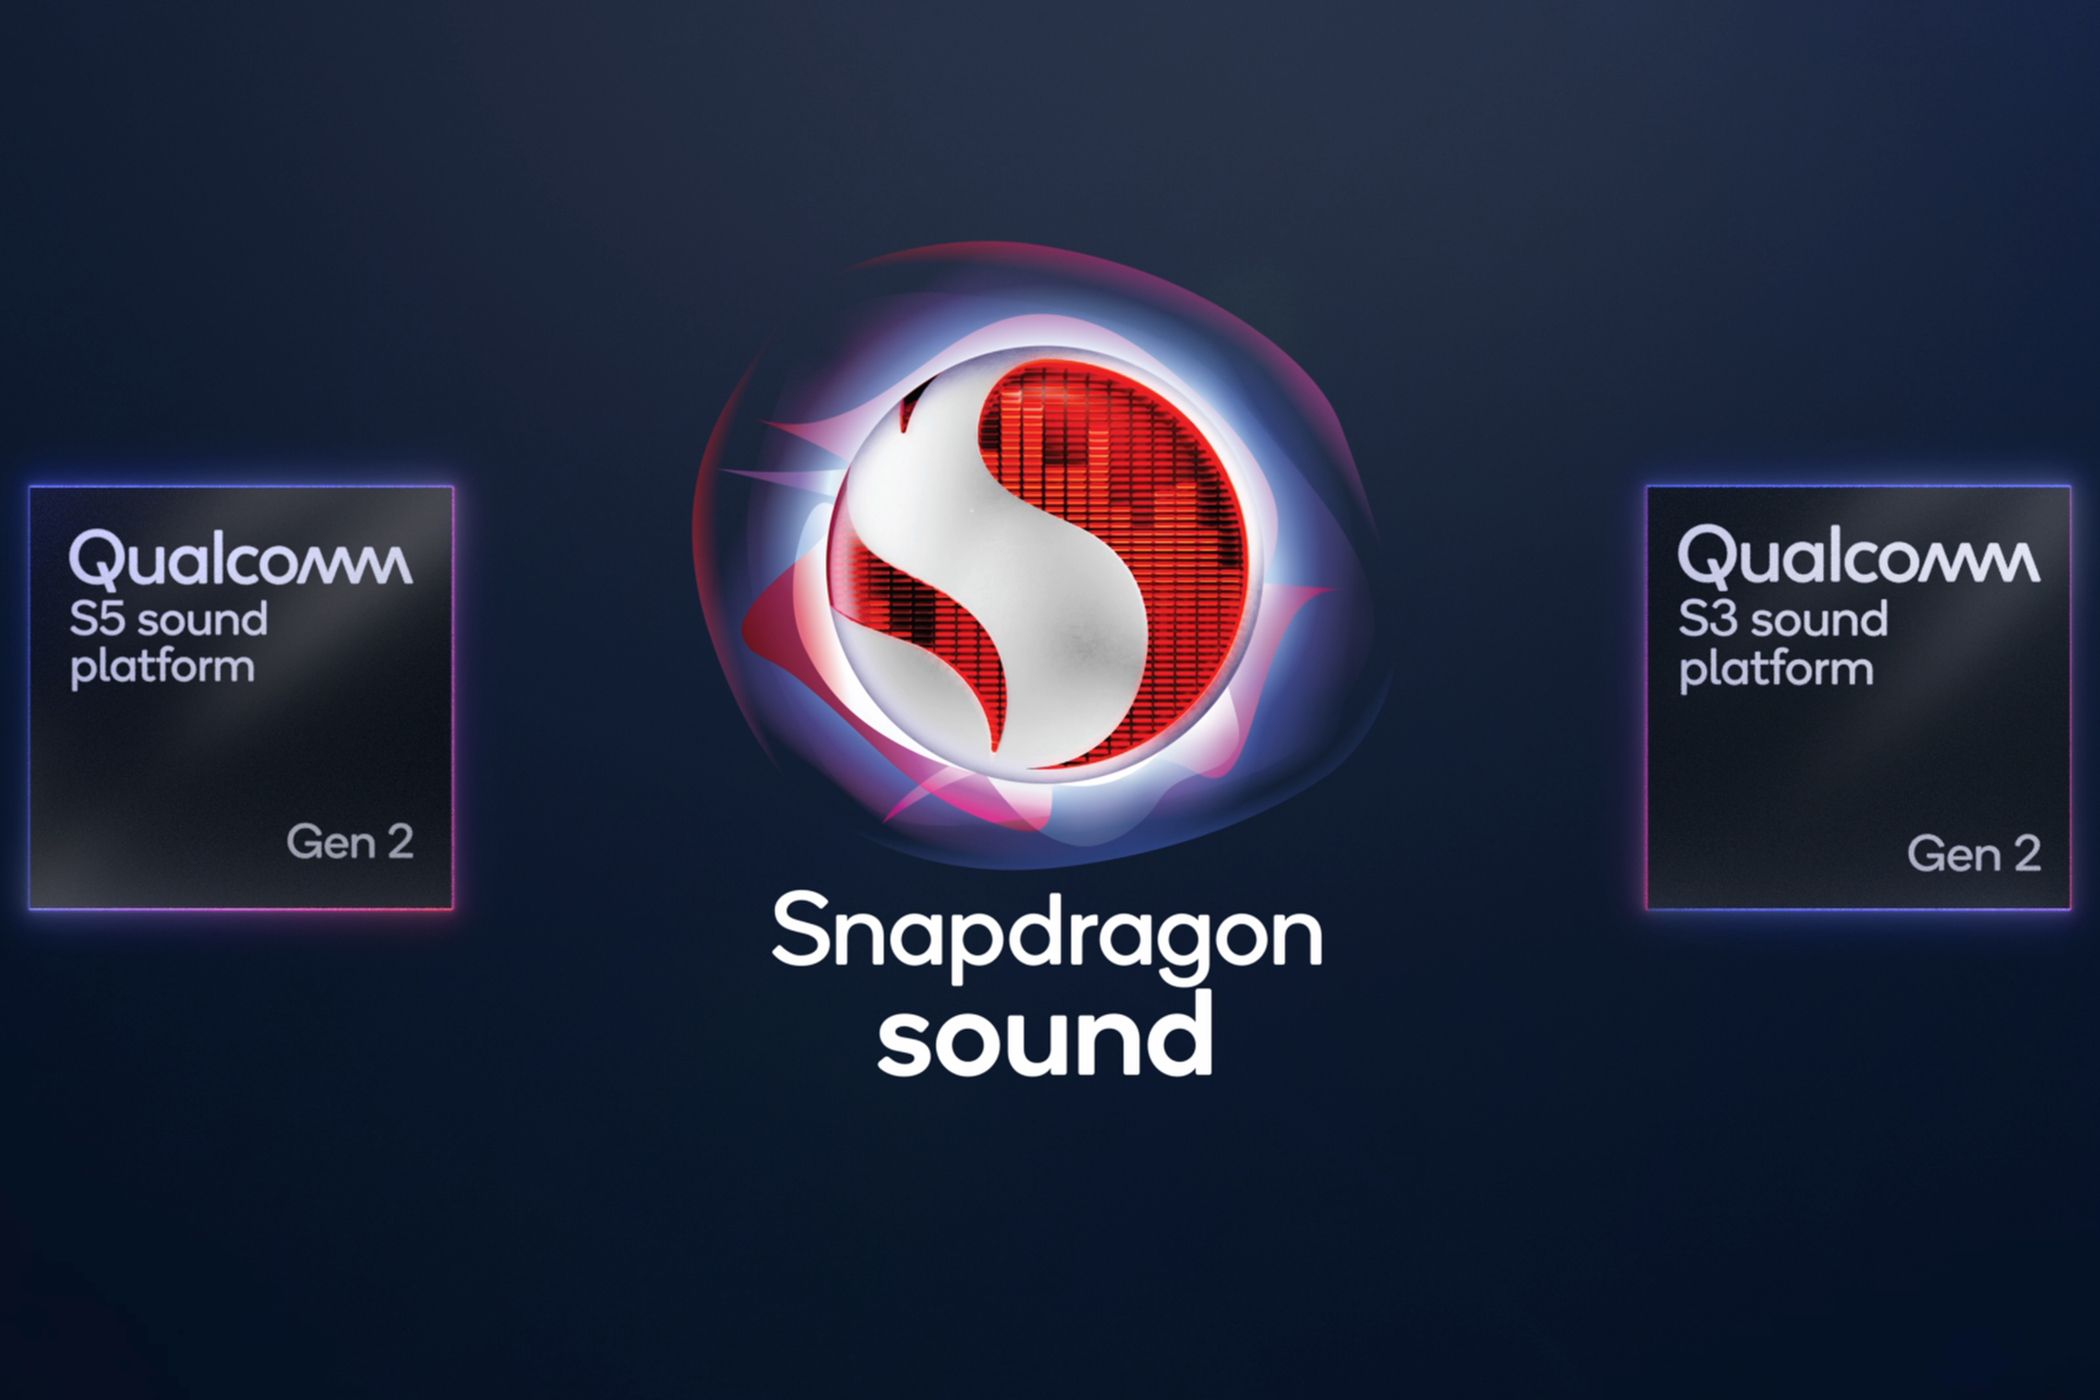 Qualcomm Snapdragon Sound logo surrounded by Snapdragon S5 Gen 2 and Snapdragon S3 Gen 2 badges.